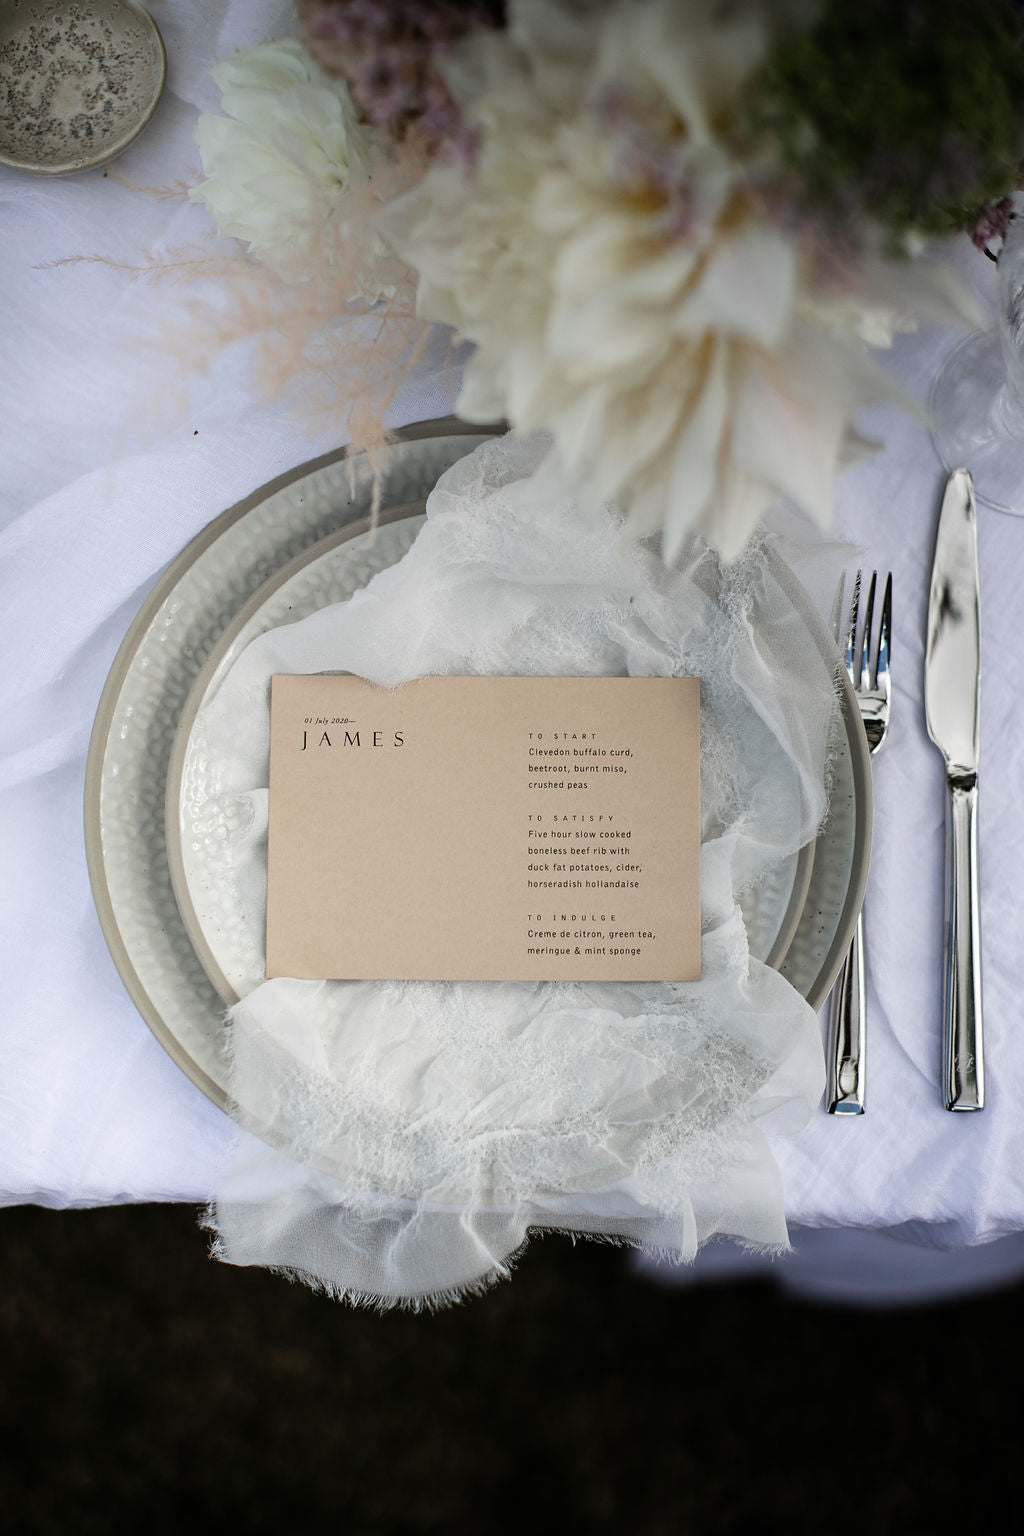 Textured White Silk Napkins for hire | Gold Coast Wedding & Event Hire